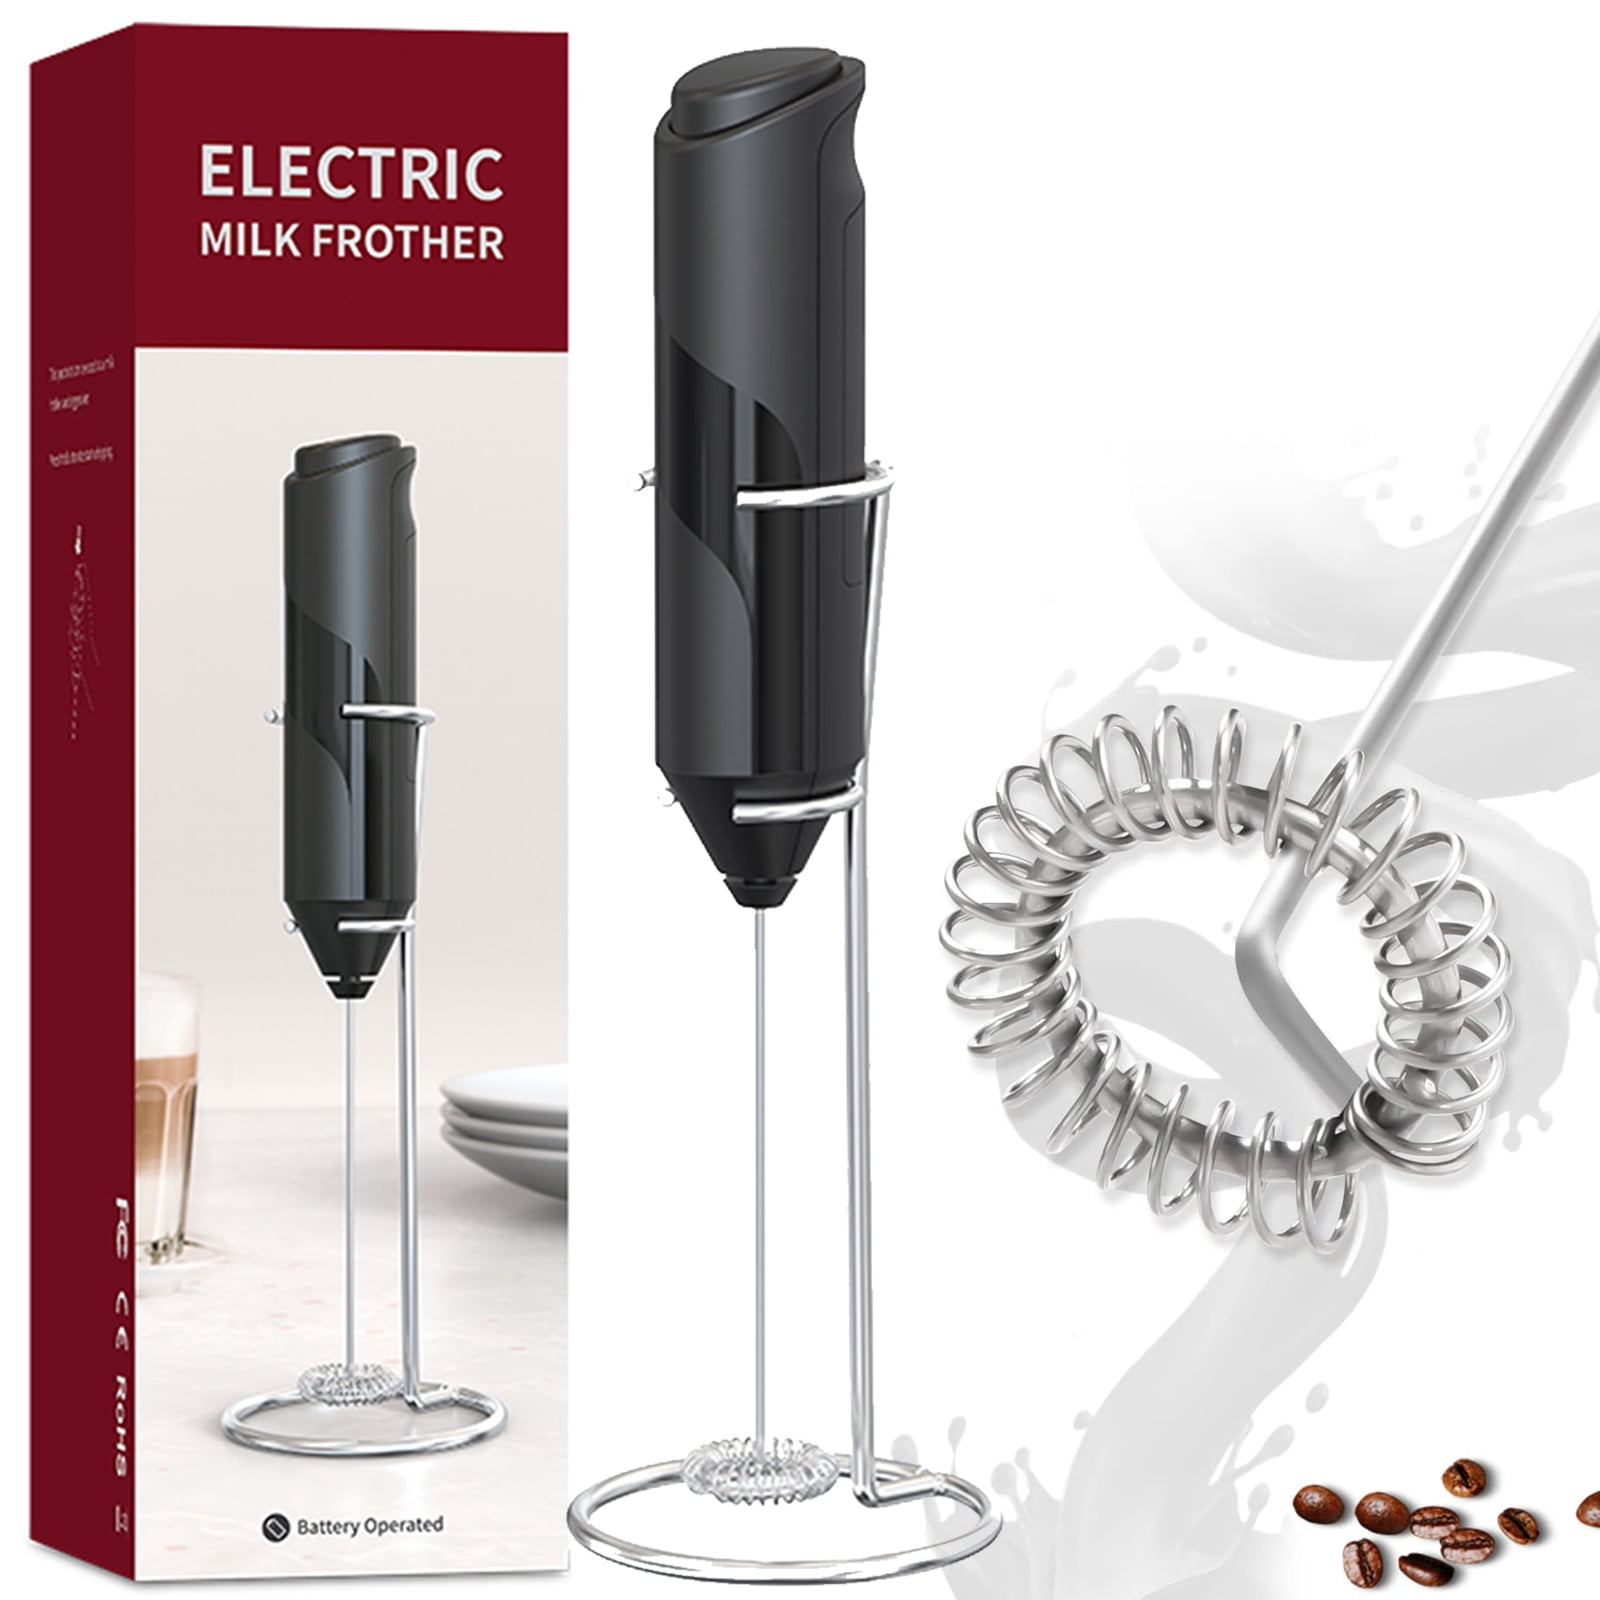 TANTOUEC Electric Milk Frother Handheld Egg Beater Stainless Steel Whisk Kitchen Tools Battery Operated,Coffee Matcha Mini Drink Mixer Blender… FREE SIZE Black